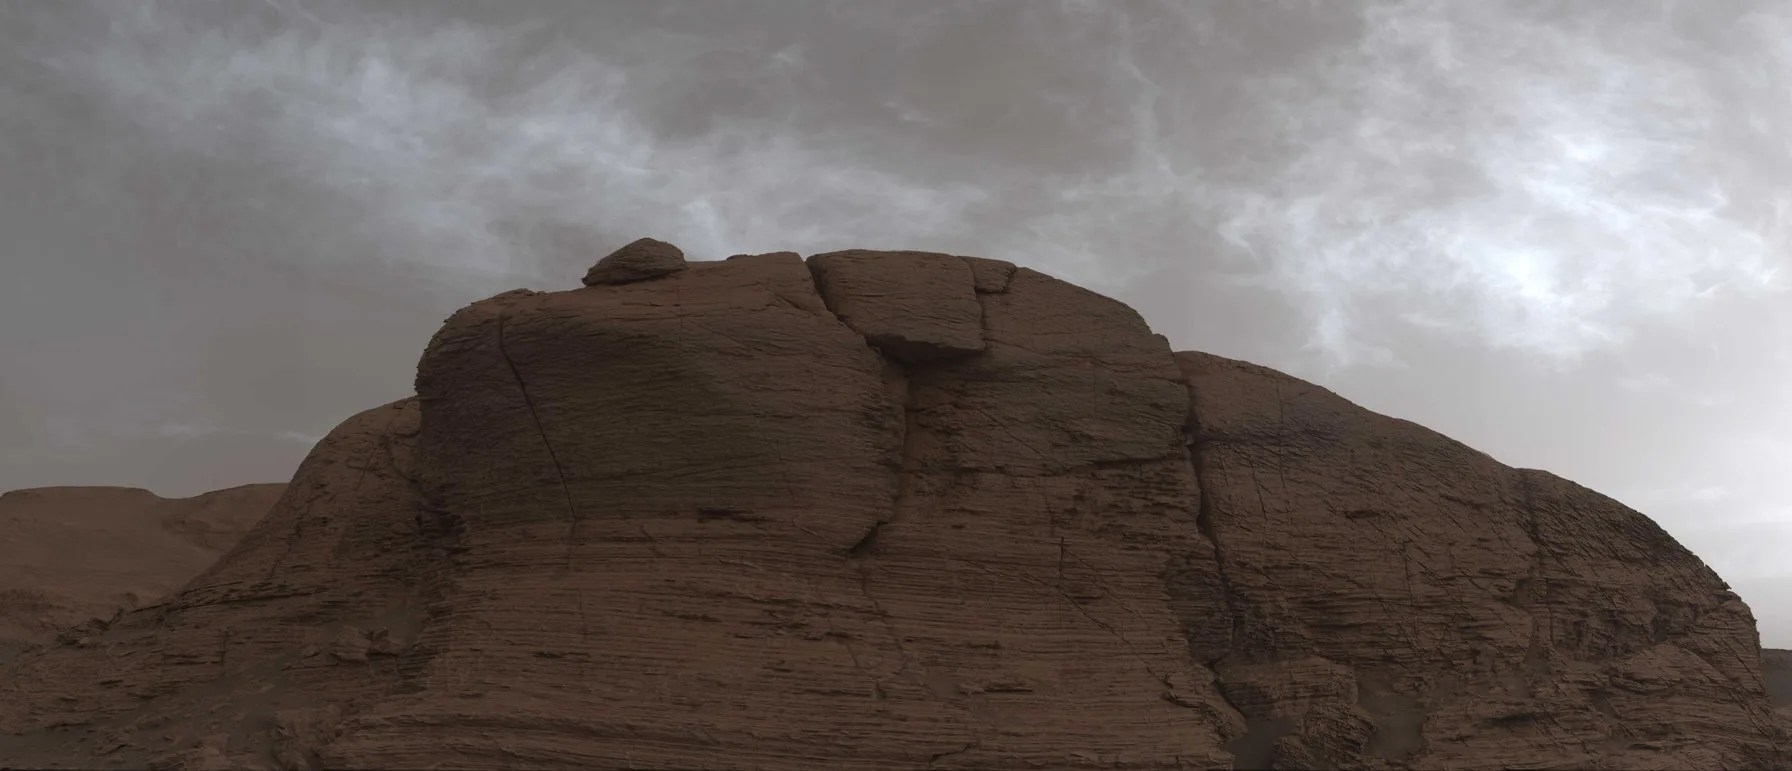 A bare orange-brown rocky cliff or outcropping with a rounded top fills most of the picture. Above it the sky is grey with a scattering of white, diffuse clouds.